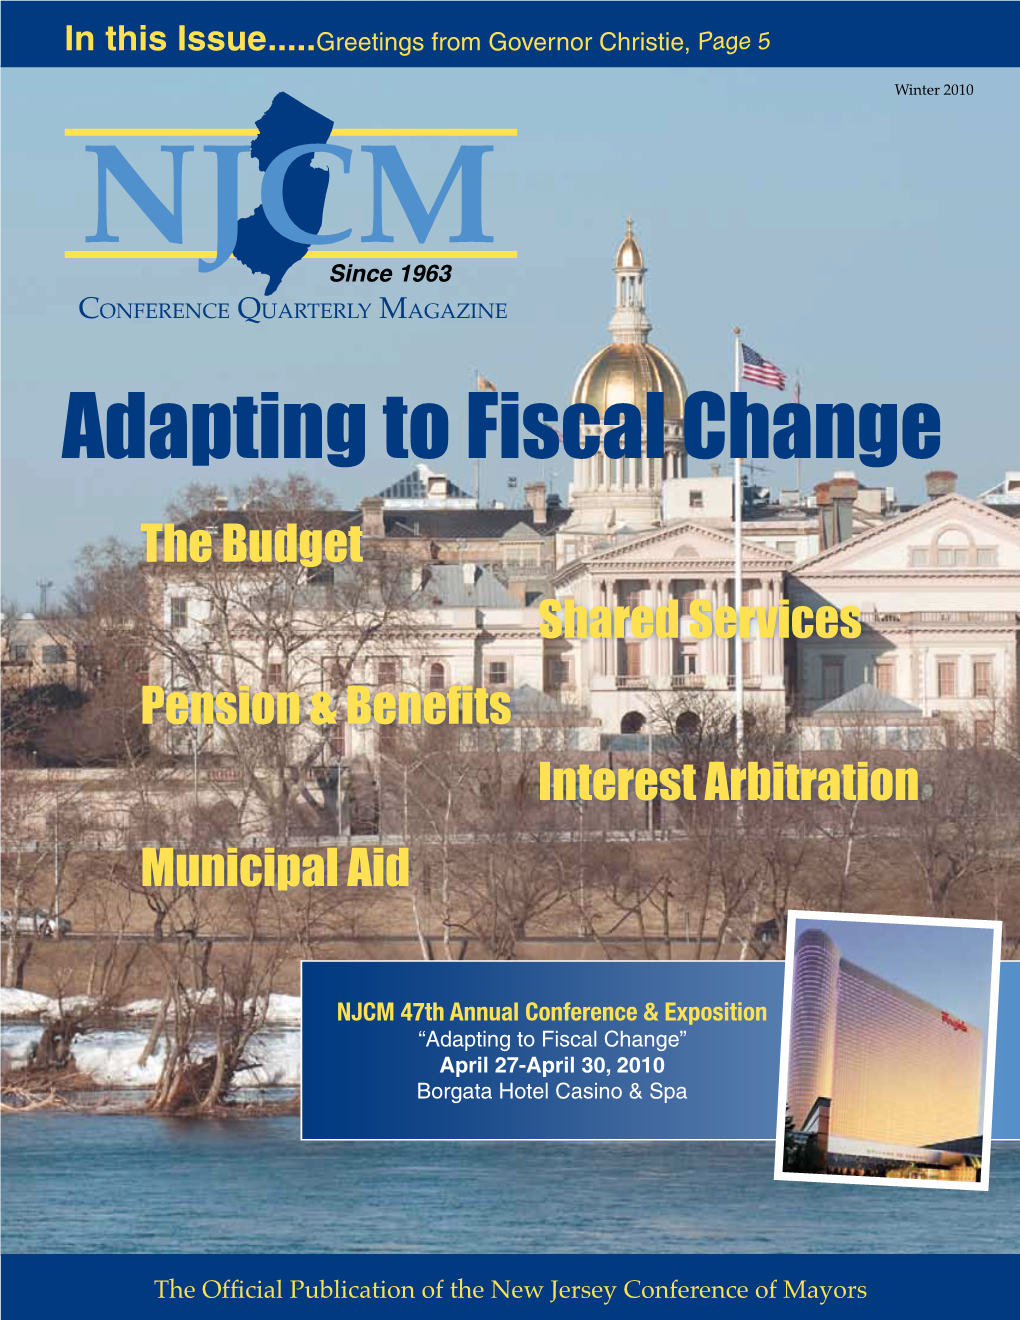 Adapting to Fiscal Change the Budget Shared Services Pension & Benefits Interest Arbitration Municipal Aid